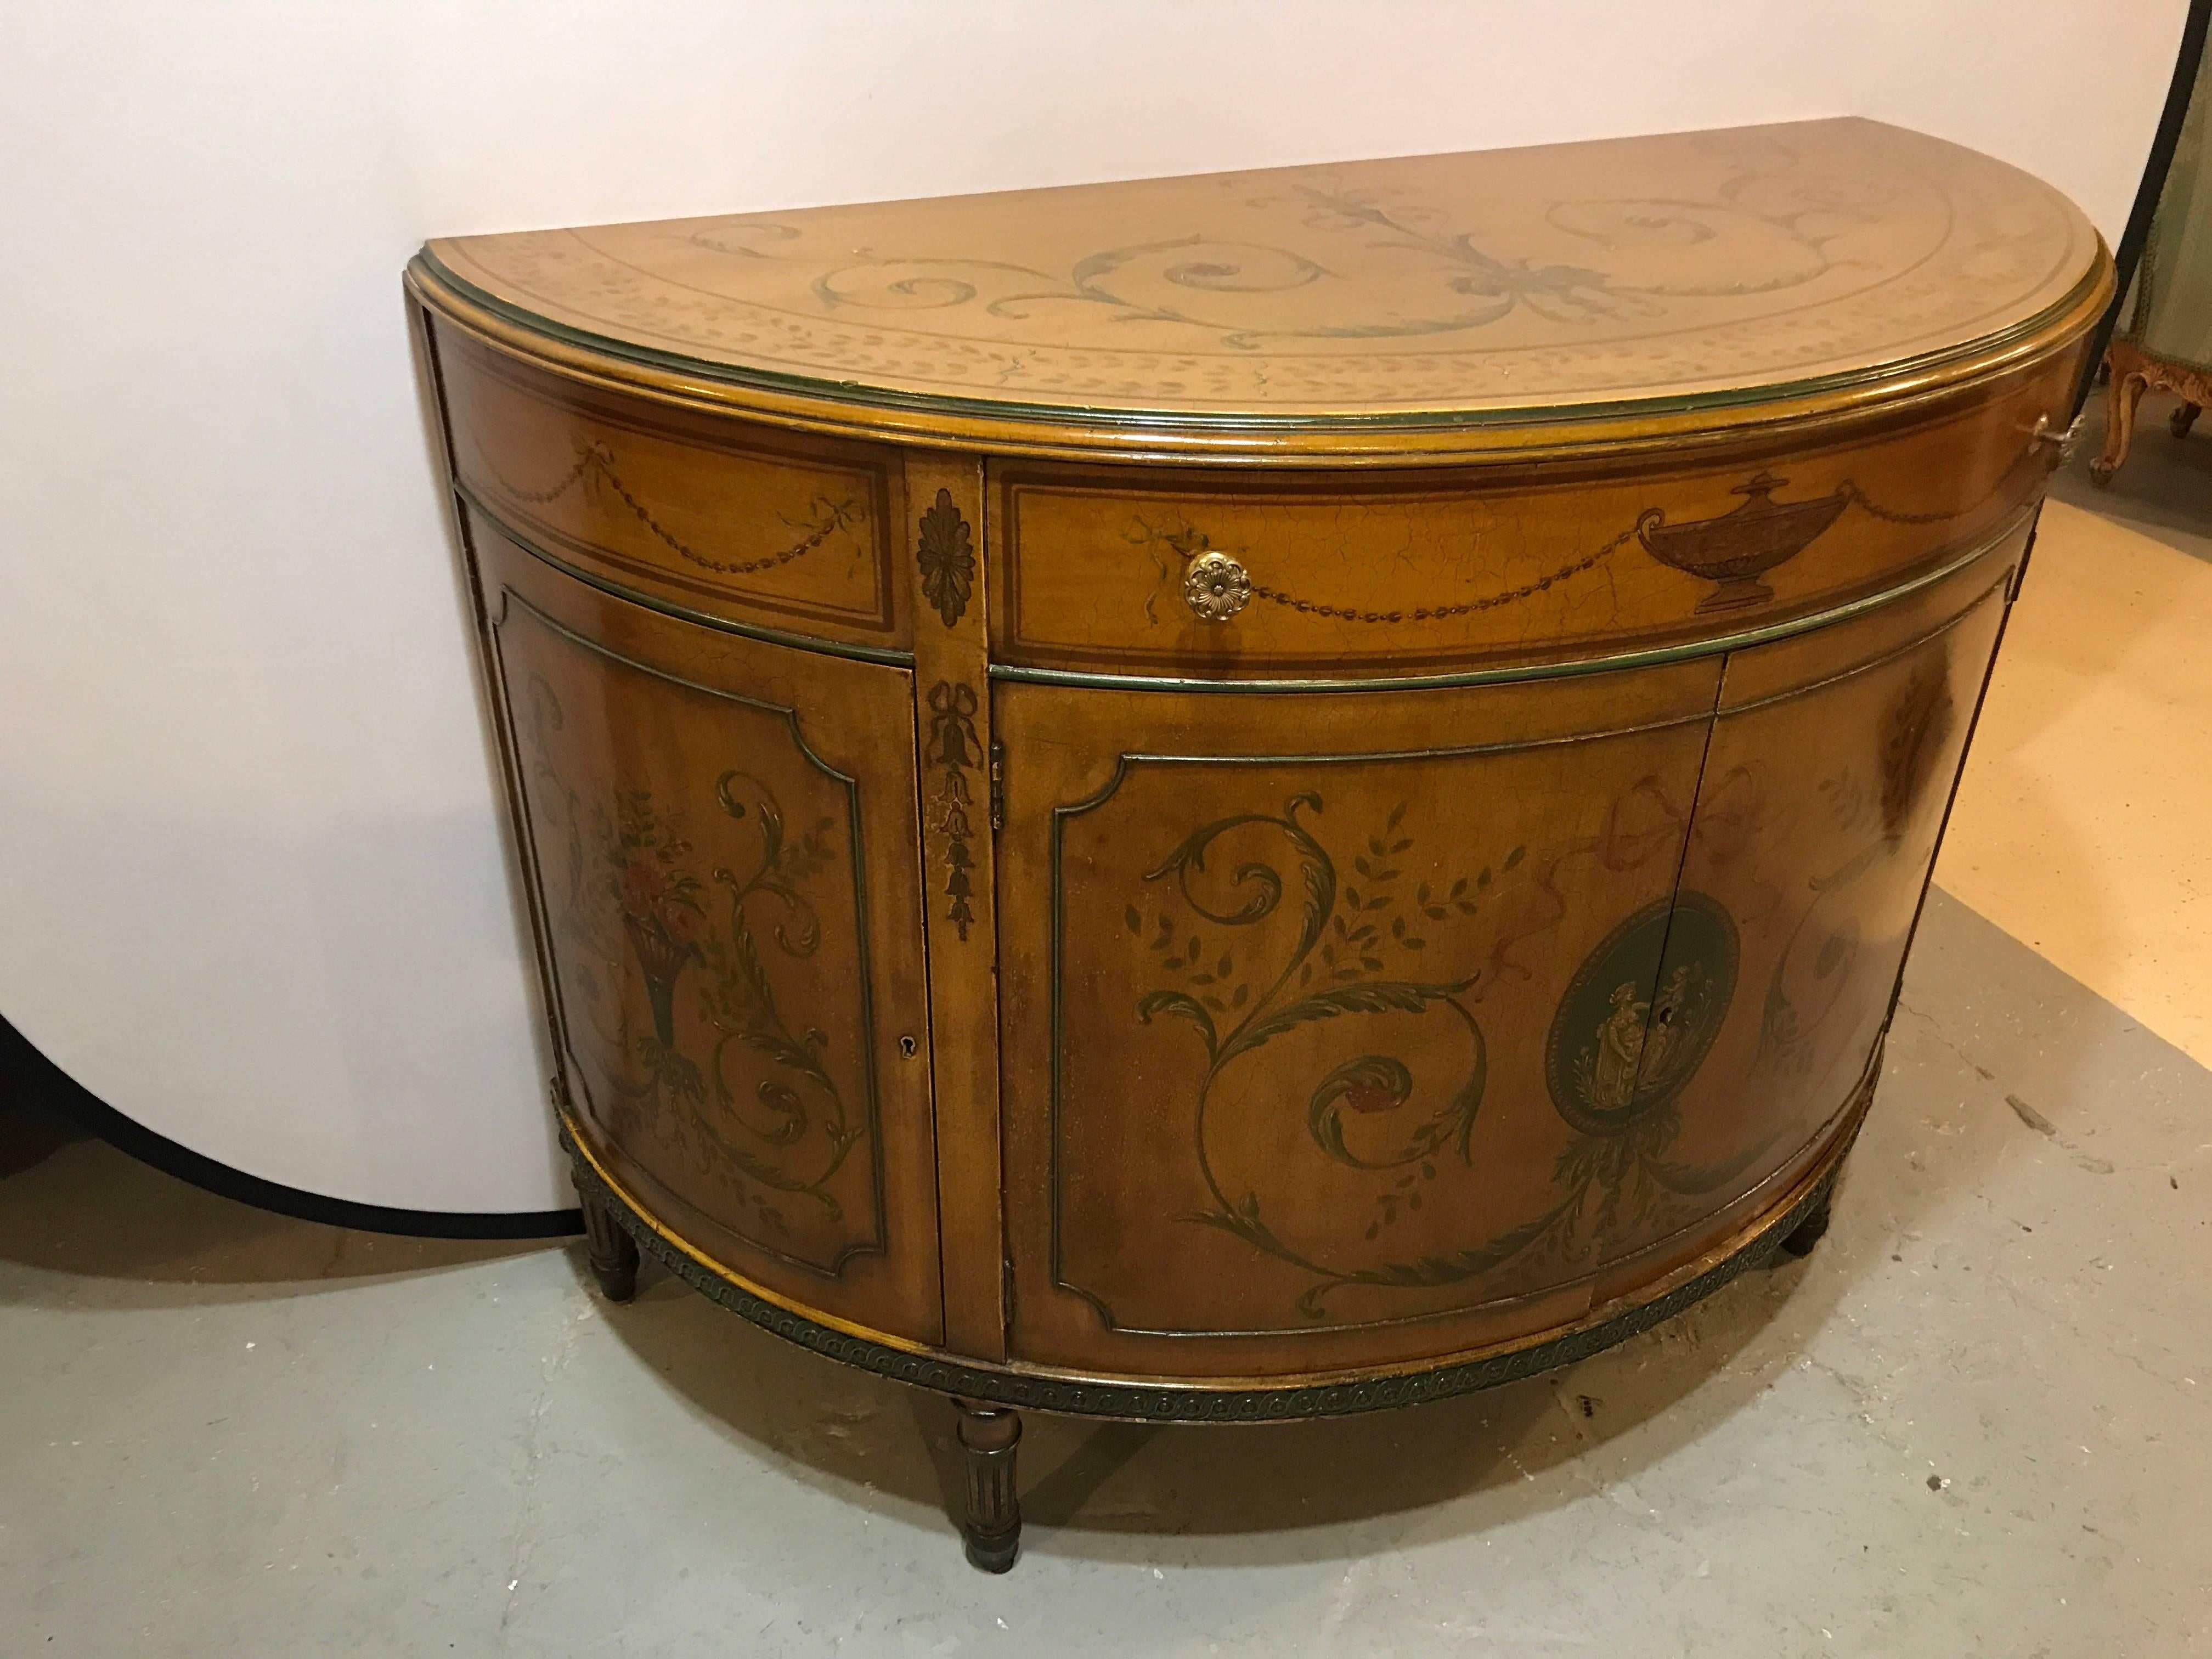 An Adams style paint decorated demilune commode or chest with interior drawers. This deep highly decorated demilune commode of Adams style has fine paint decorated features. The case itself having been French hand rubbed polished. The rare chest has